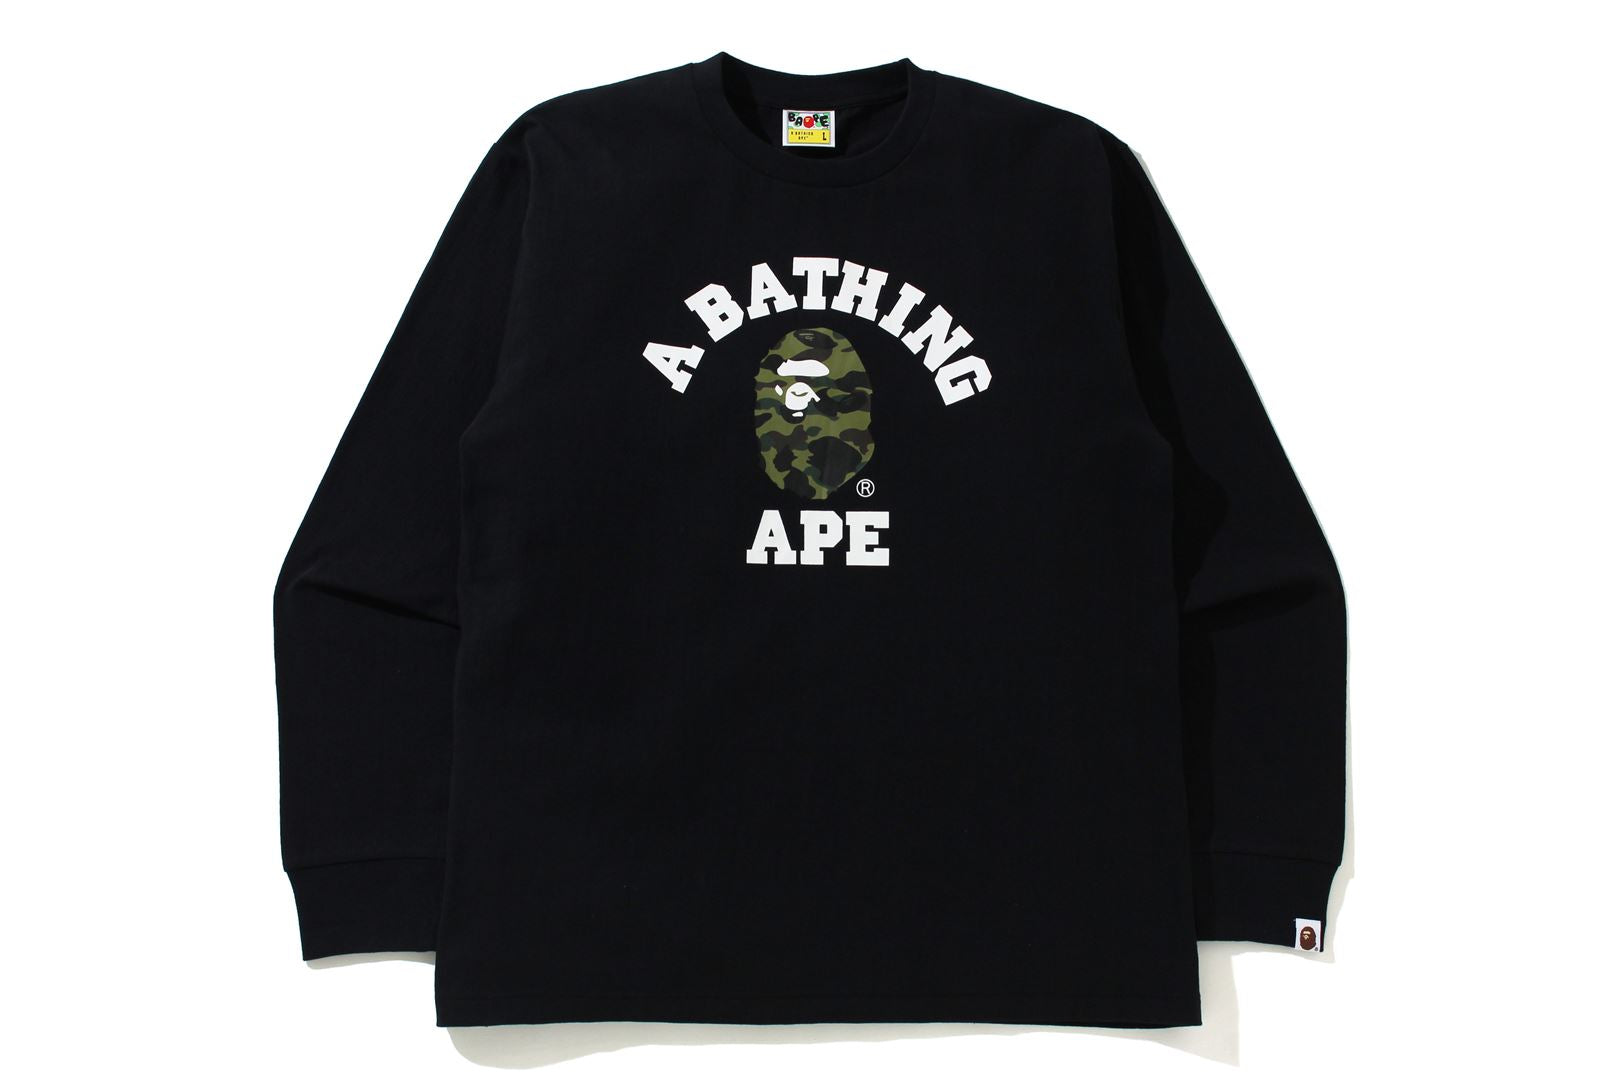 Best Selling Shopify Products on bape.com-5